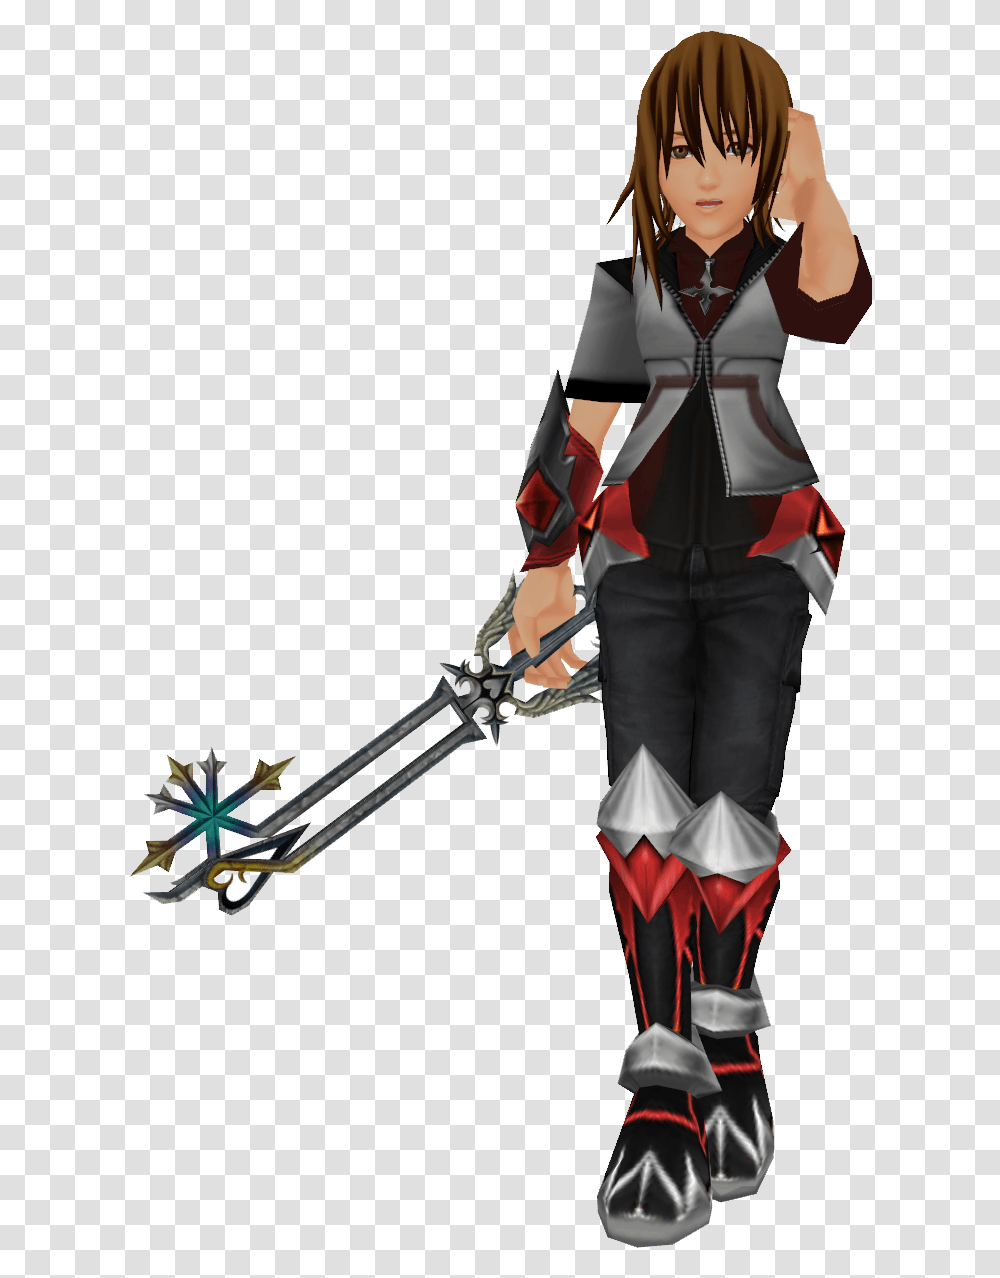 Kingdom Hearts Iii Download Image Kingdom Hearts Characters, Person, Costume, Clothing, Tool Transparent Png